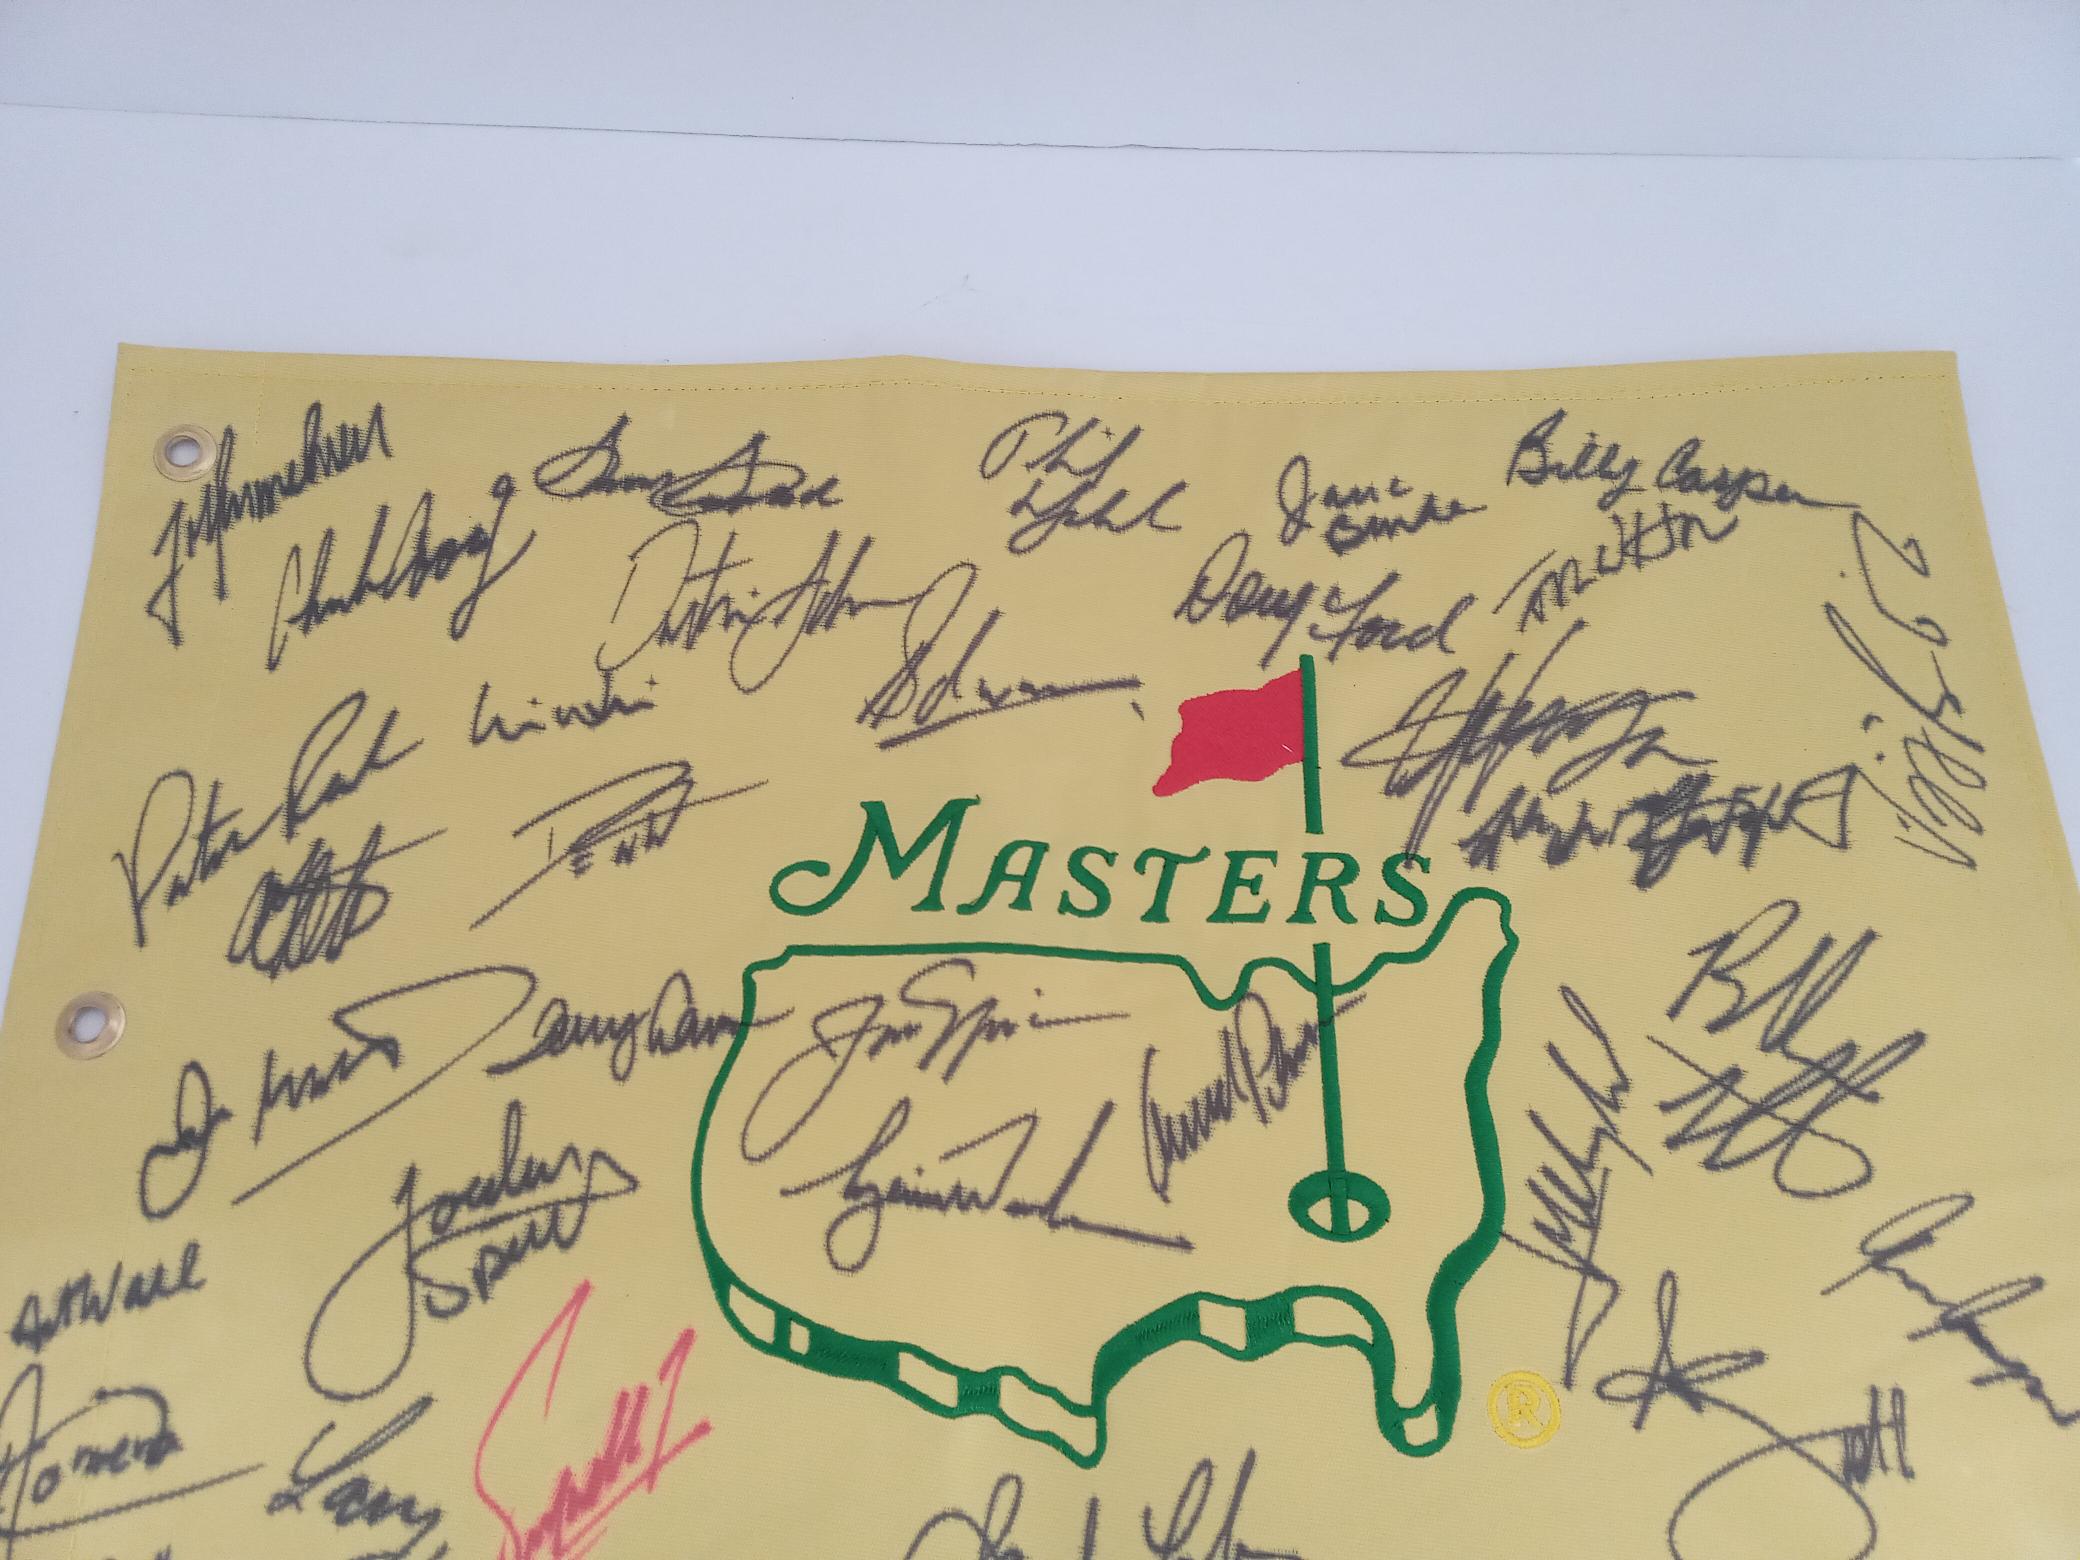 Tiger Woods, Jack Nicklaus, Arnold Palmer, Sam Snead, Masters champion signed golf flag with proof